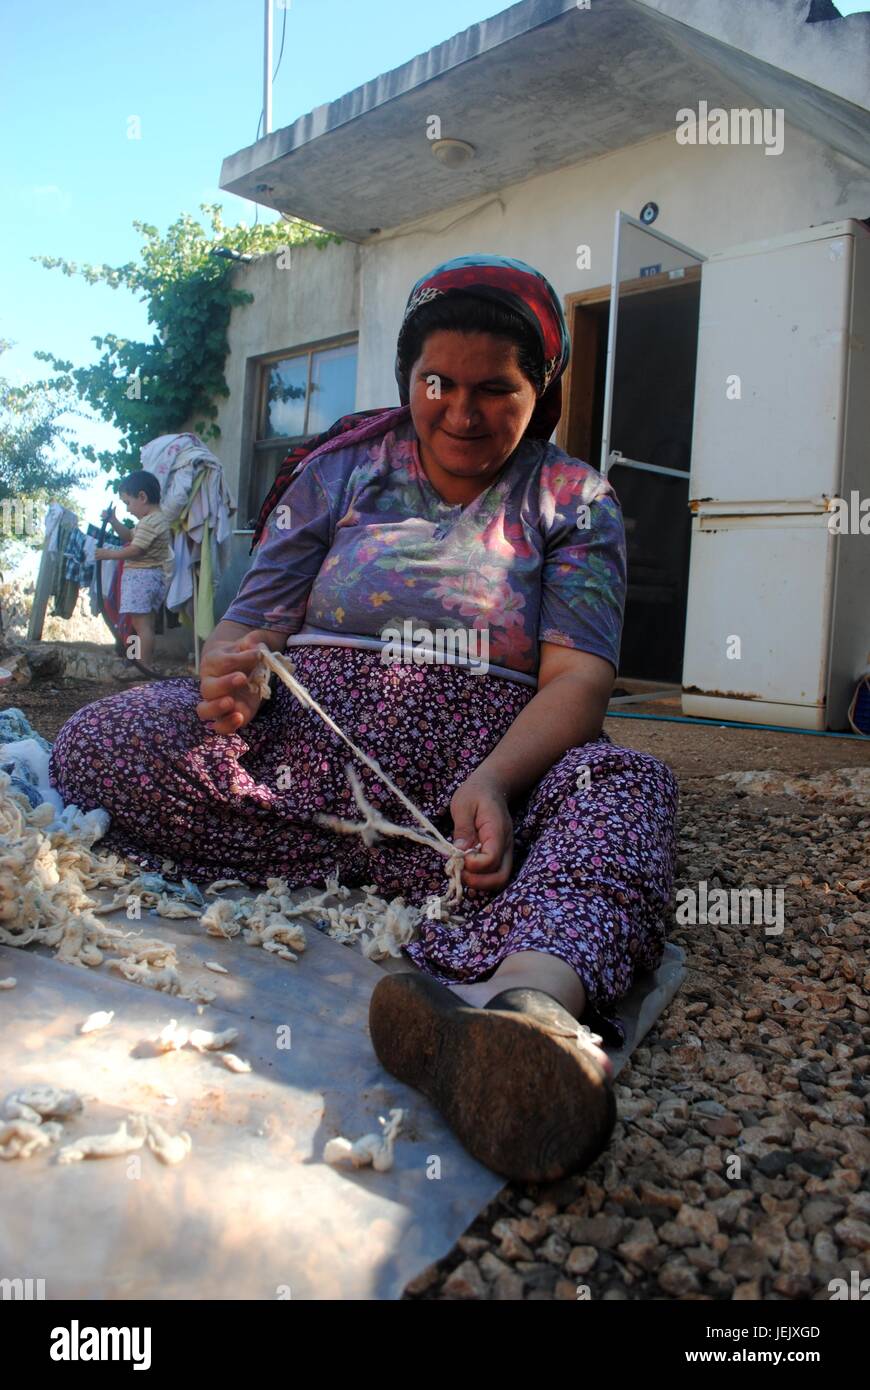 Turkish woman at work with cotton Stock Photo